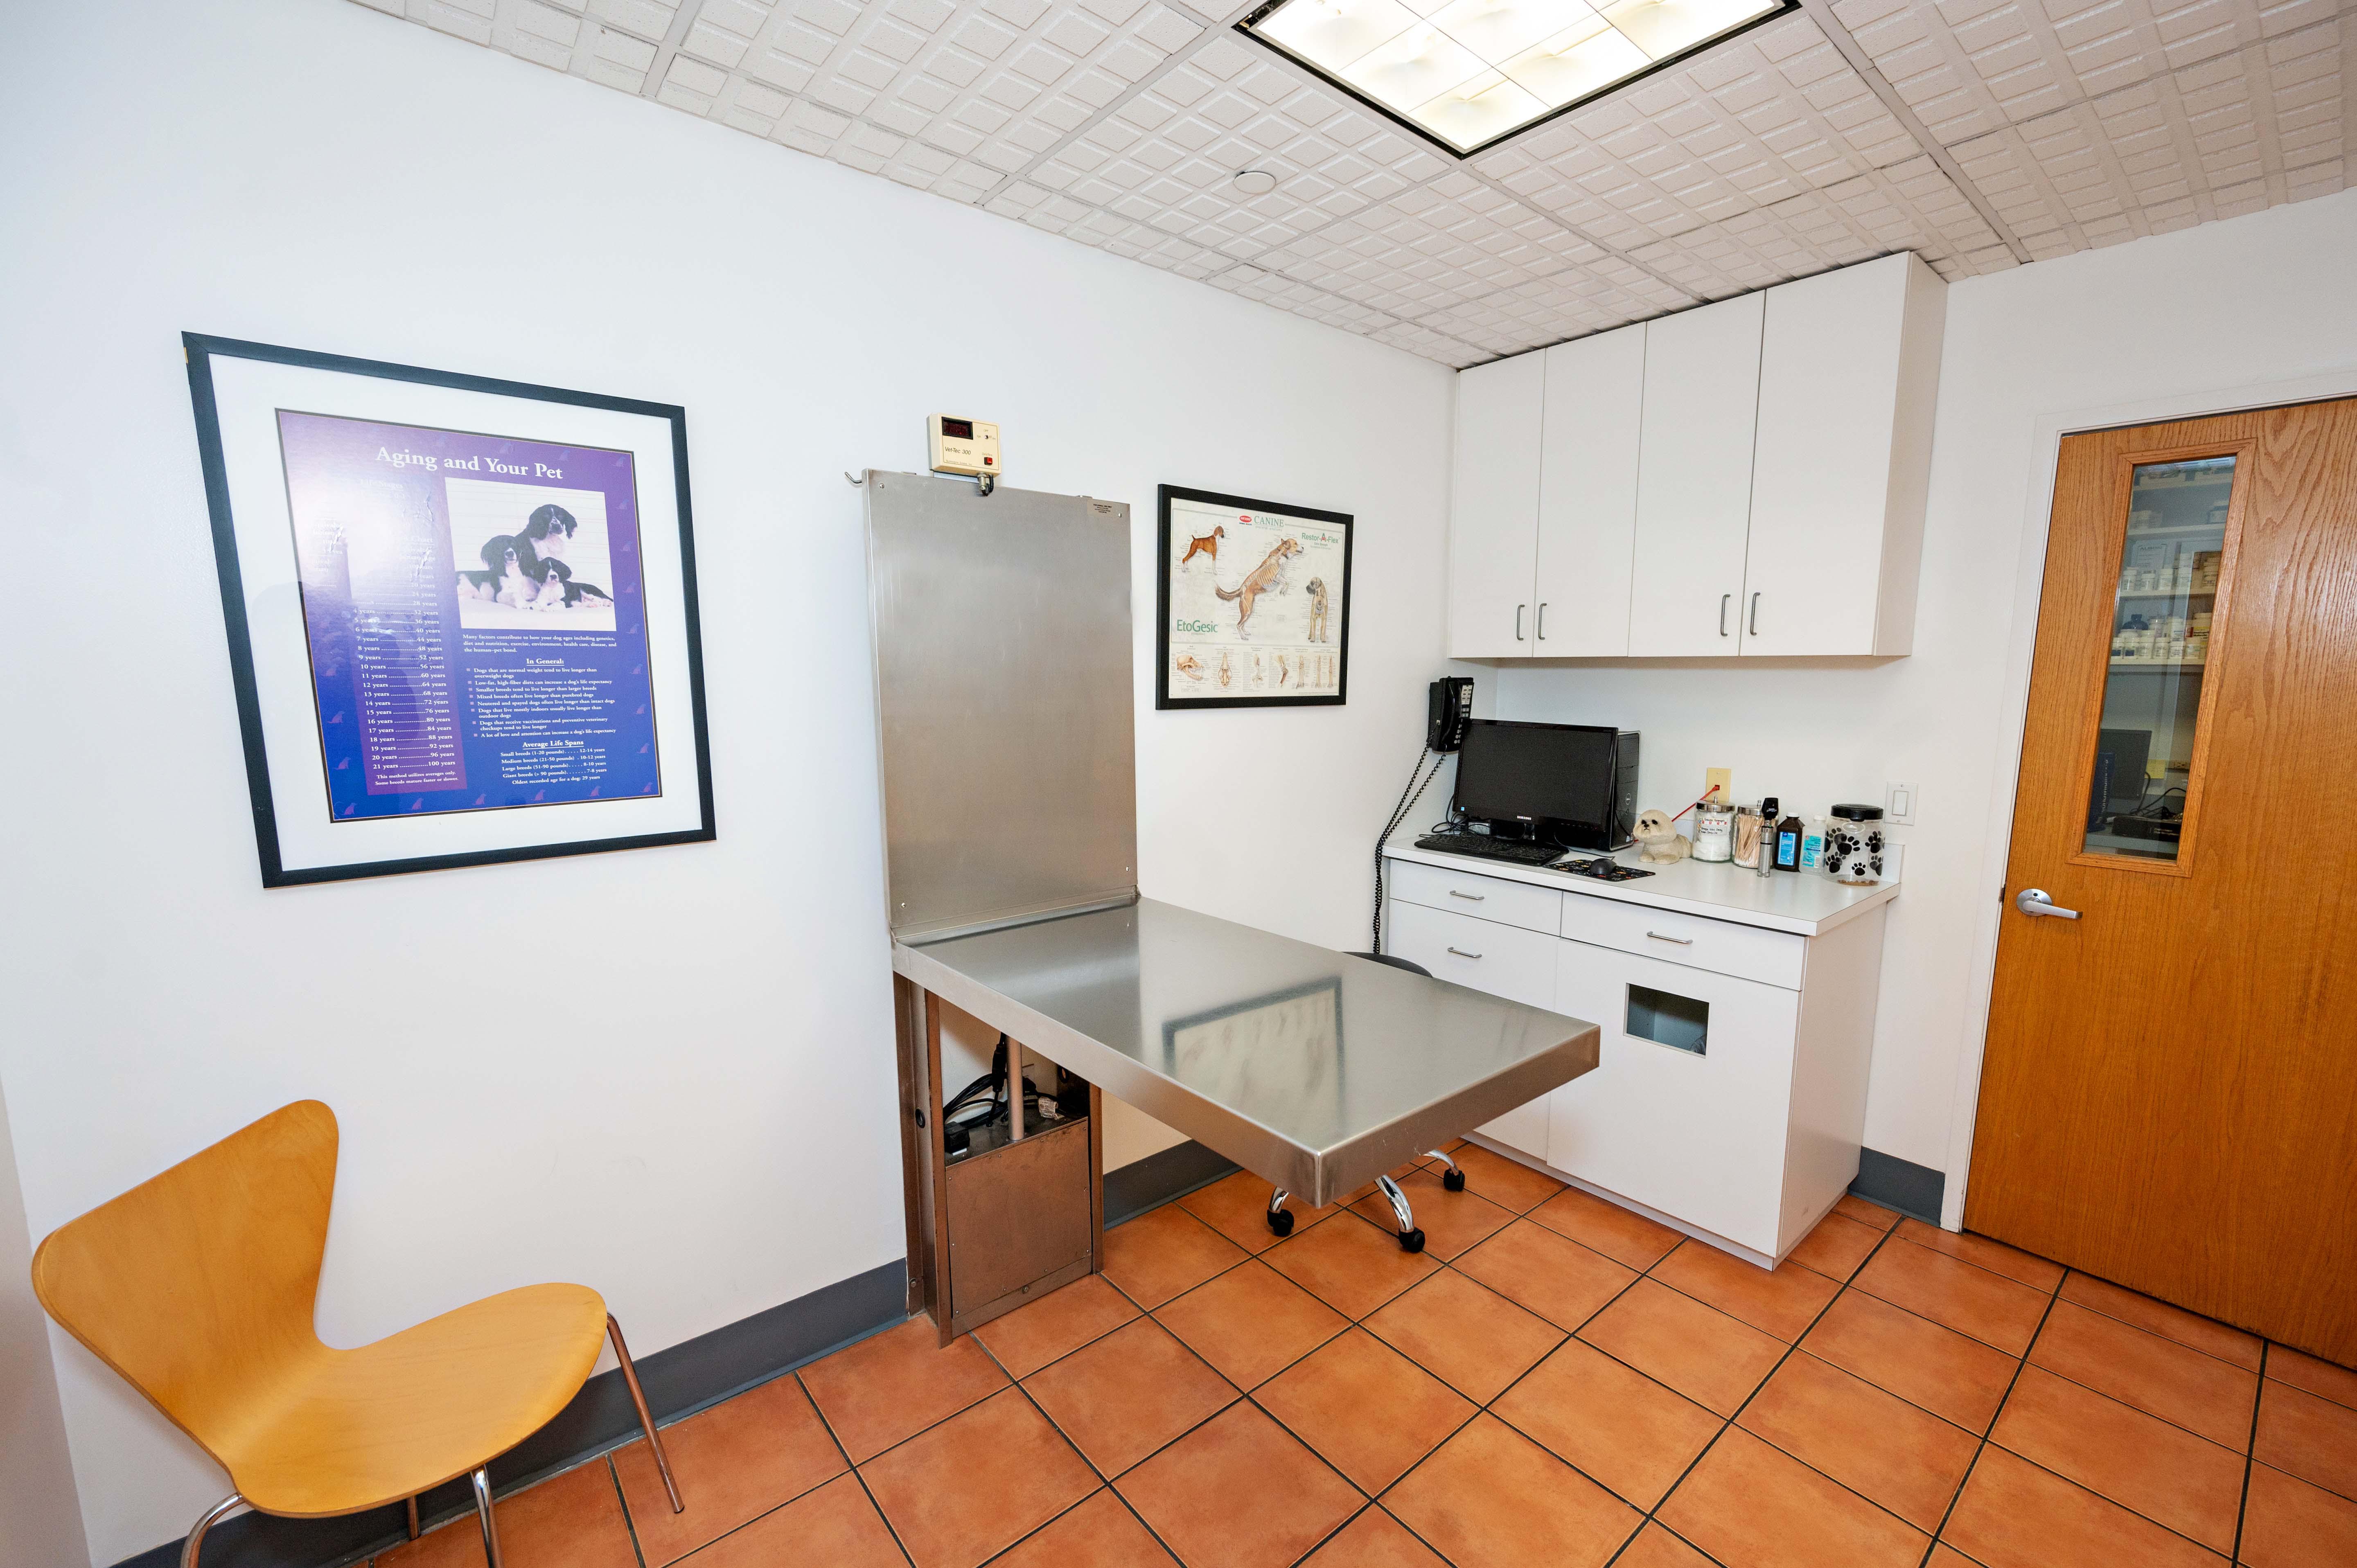 Hartsdale Veterinary Hospital has multiple private exam rooms where your pet will be examined by one of our experienced veterinarians.